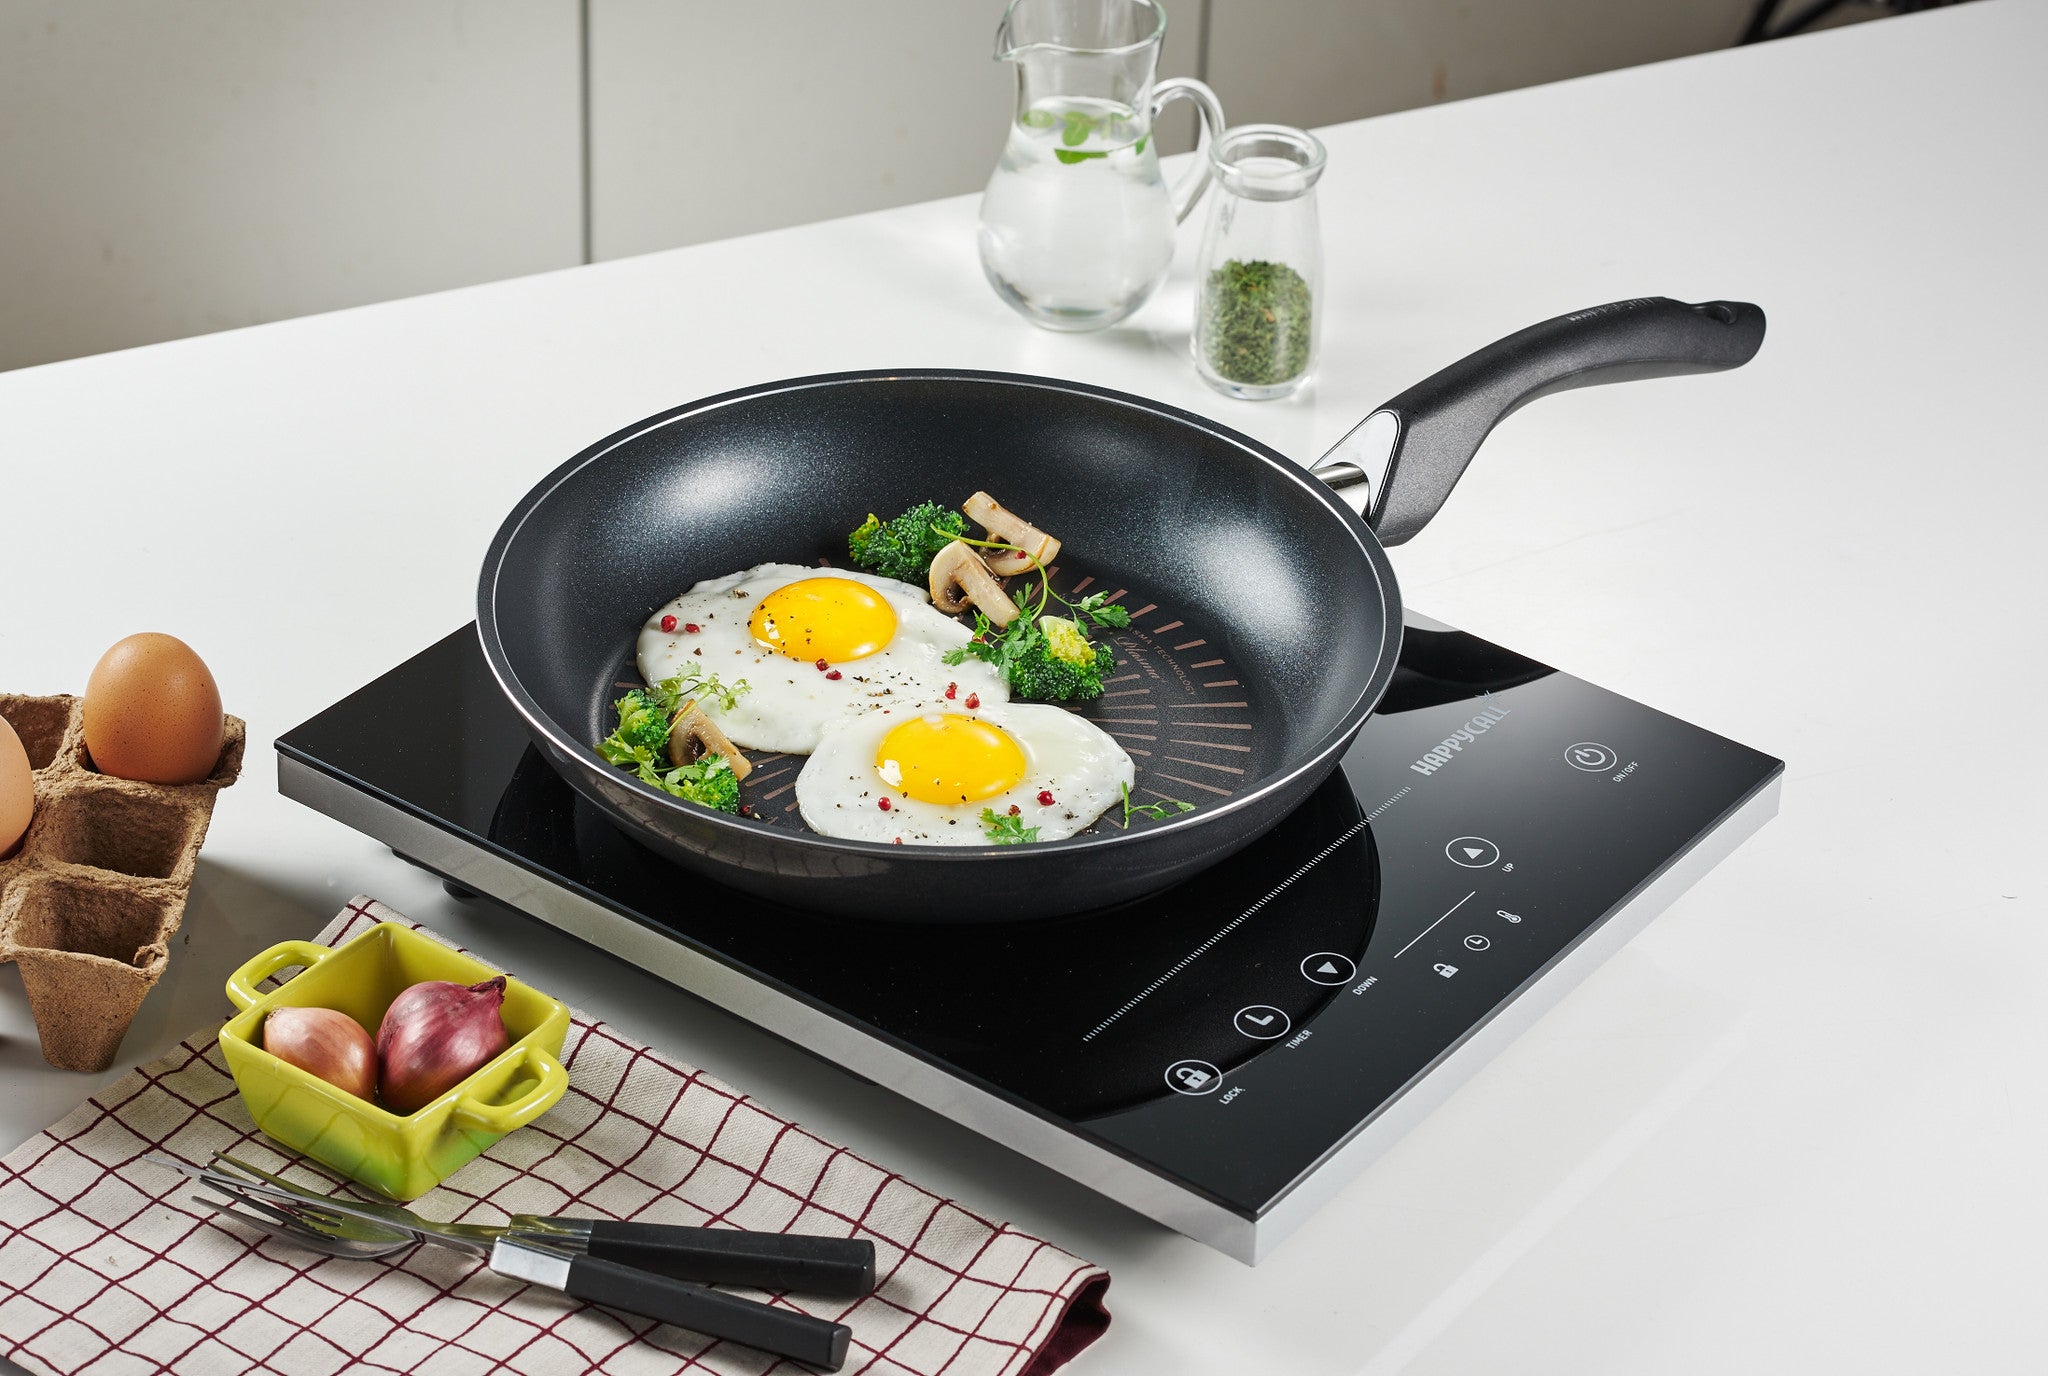 Forbest LTD - Happycall Double Fry Pan available at